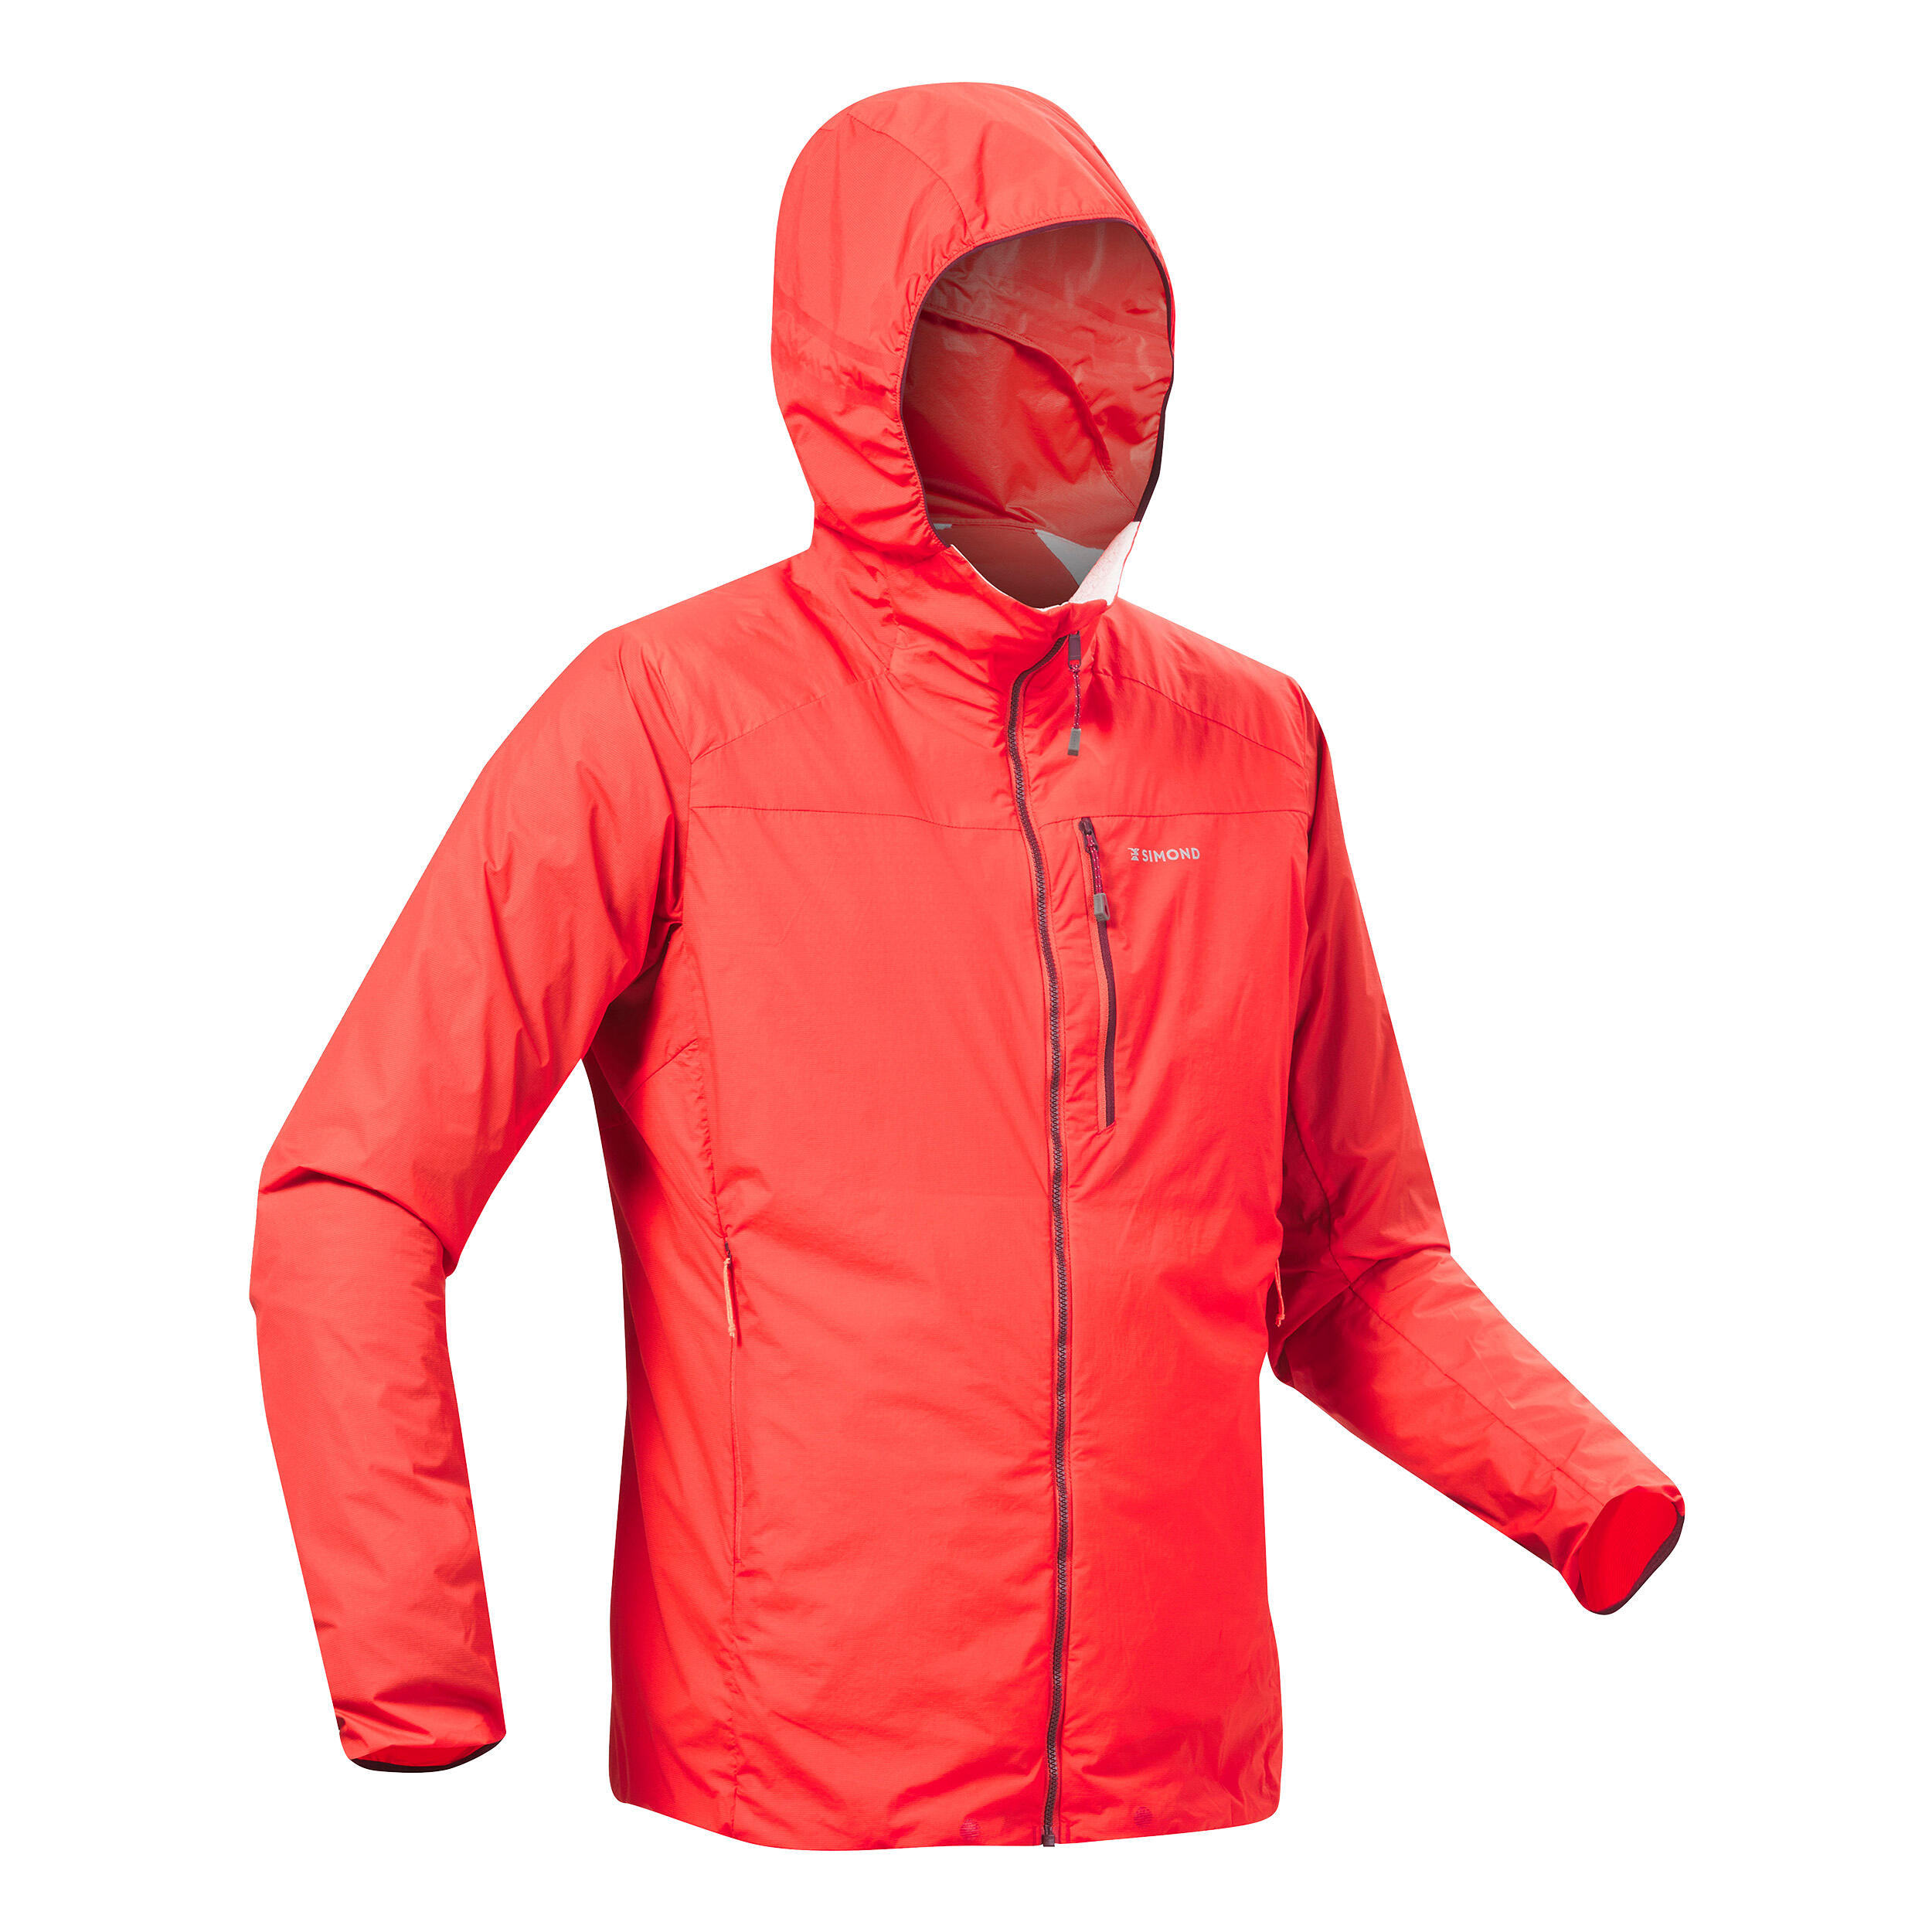 MEN'S WINDPROOF JACKET FOR MOUNTAINEERING - VERMILION RED 16/16